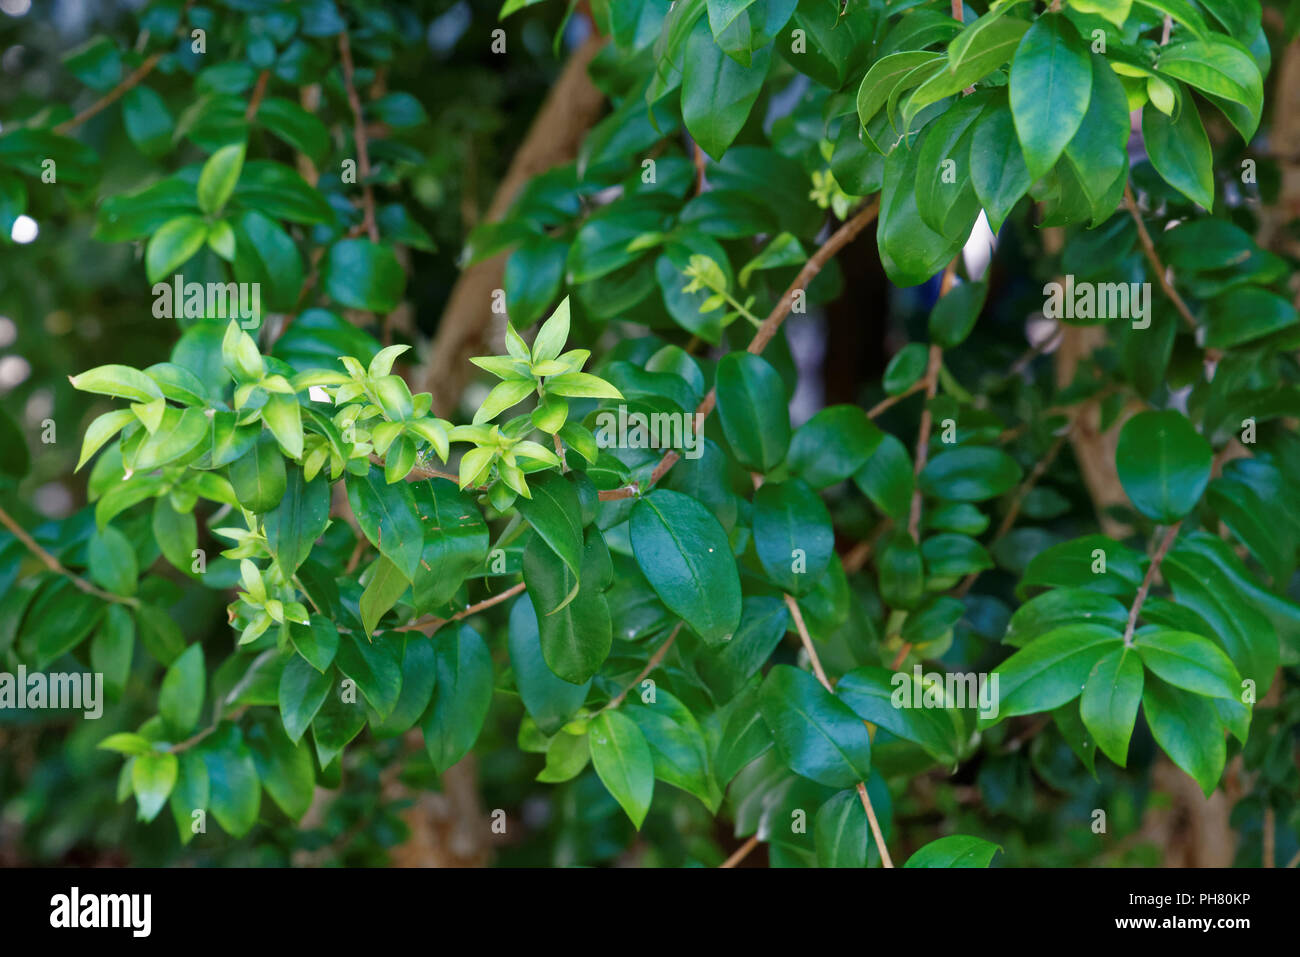 Myrtus communis, the common myrtle, is a species of flowering plant in the myrtle family Myrtaceae. Stock Photo